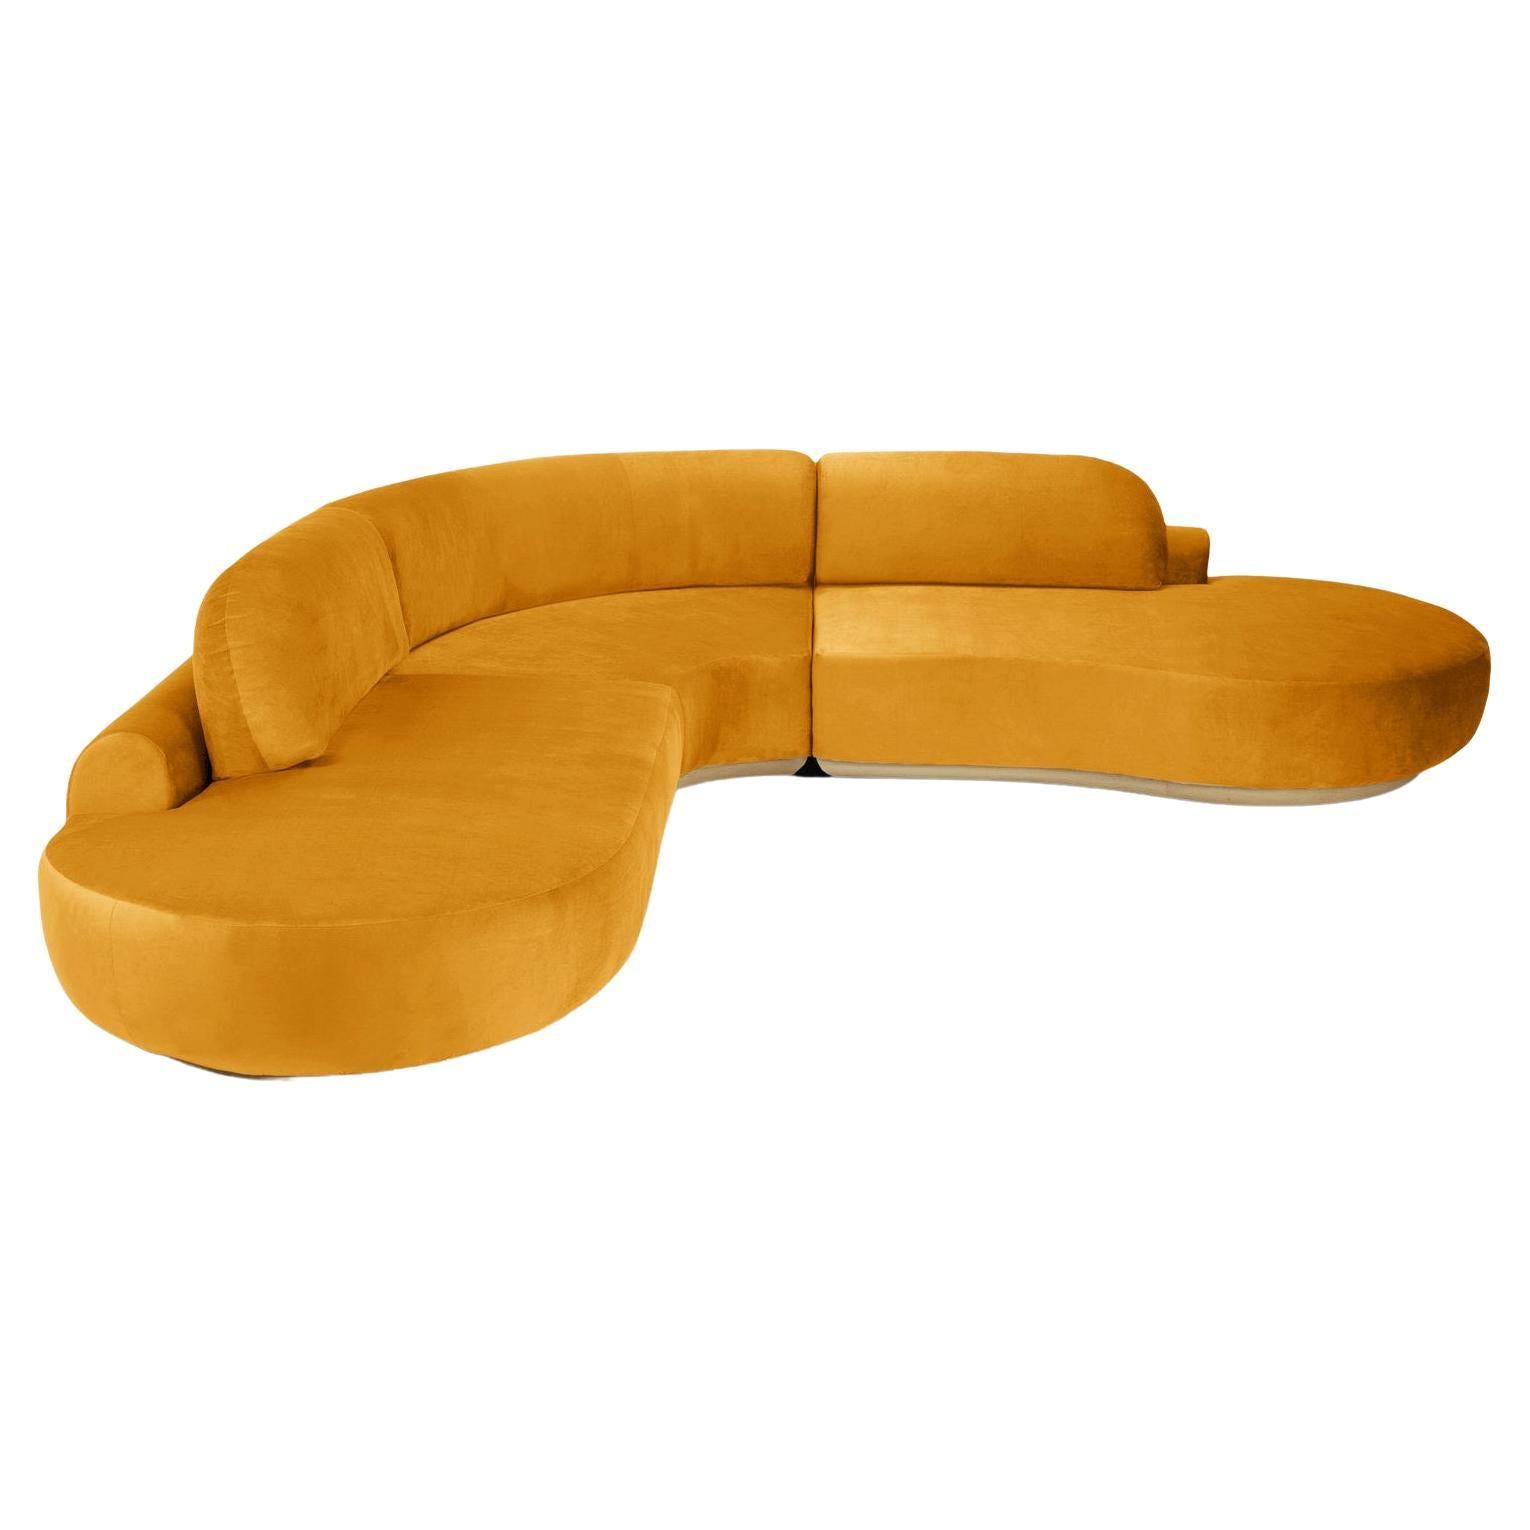 Naked Curved Sectional Sofa, 3 Piece with Natural Oak and Corn For Sale